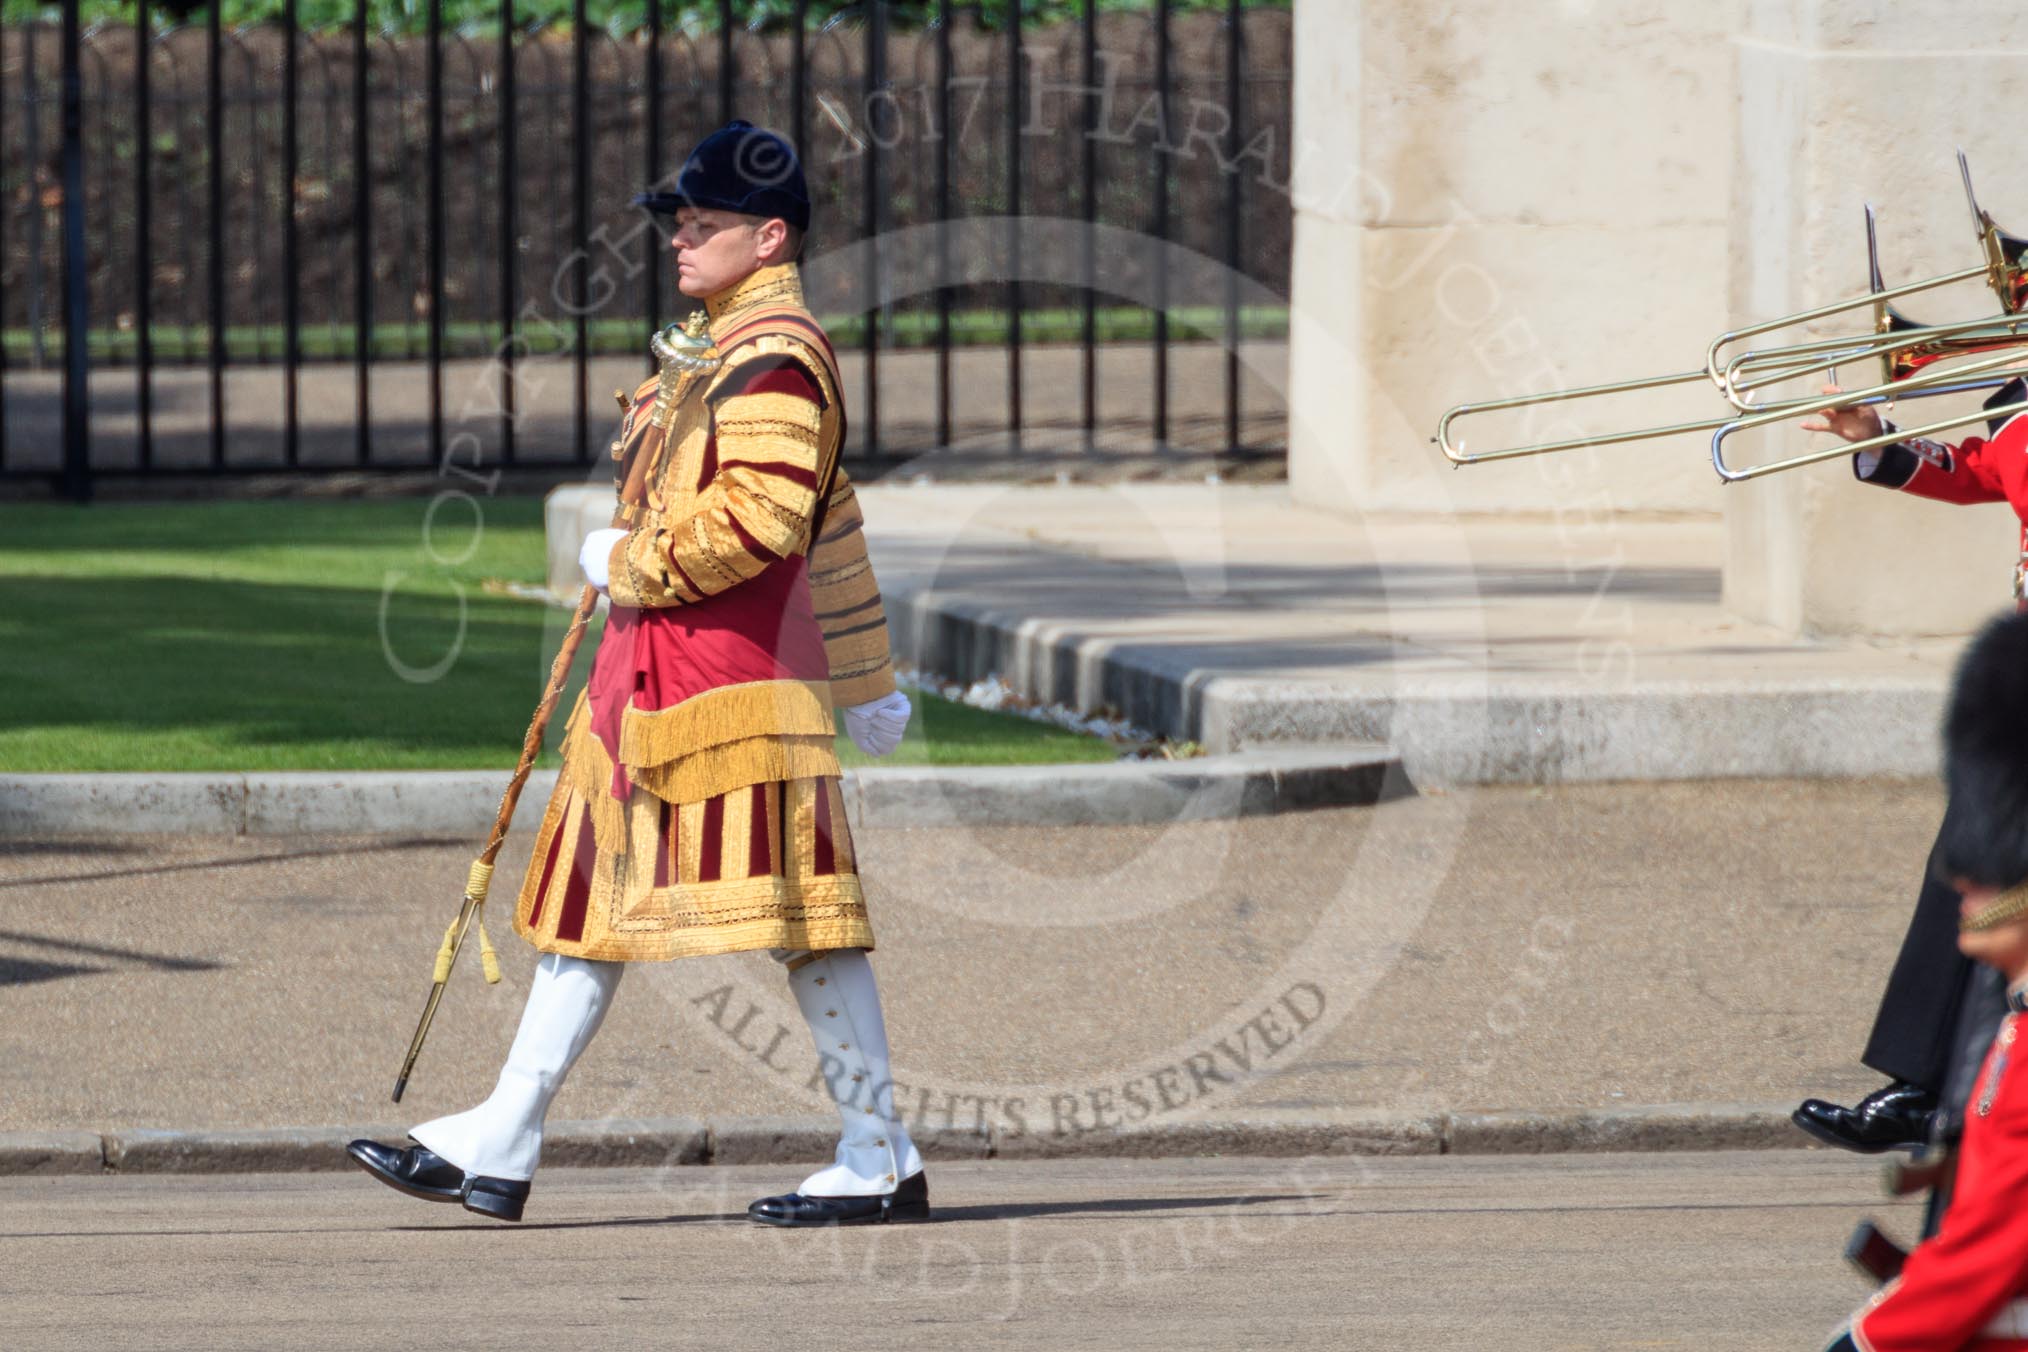 Drum Major Gareth Chambers, 1st Battalion Irish Guards leading the Band of the Irish Guards during Trooping the Colour 2018, The Queen's Birthday Parade at Horse Guards Parade, Westminster, London, 9 June 2018, 10:28.